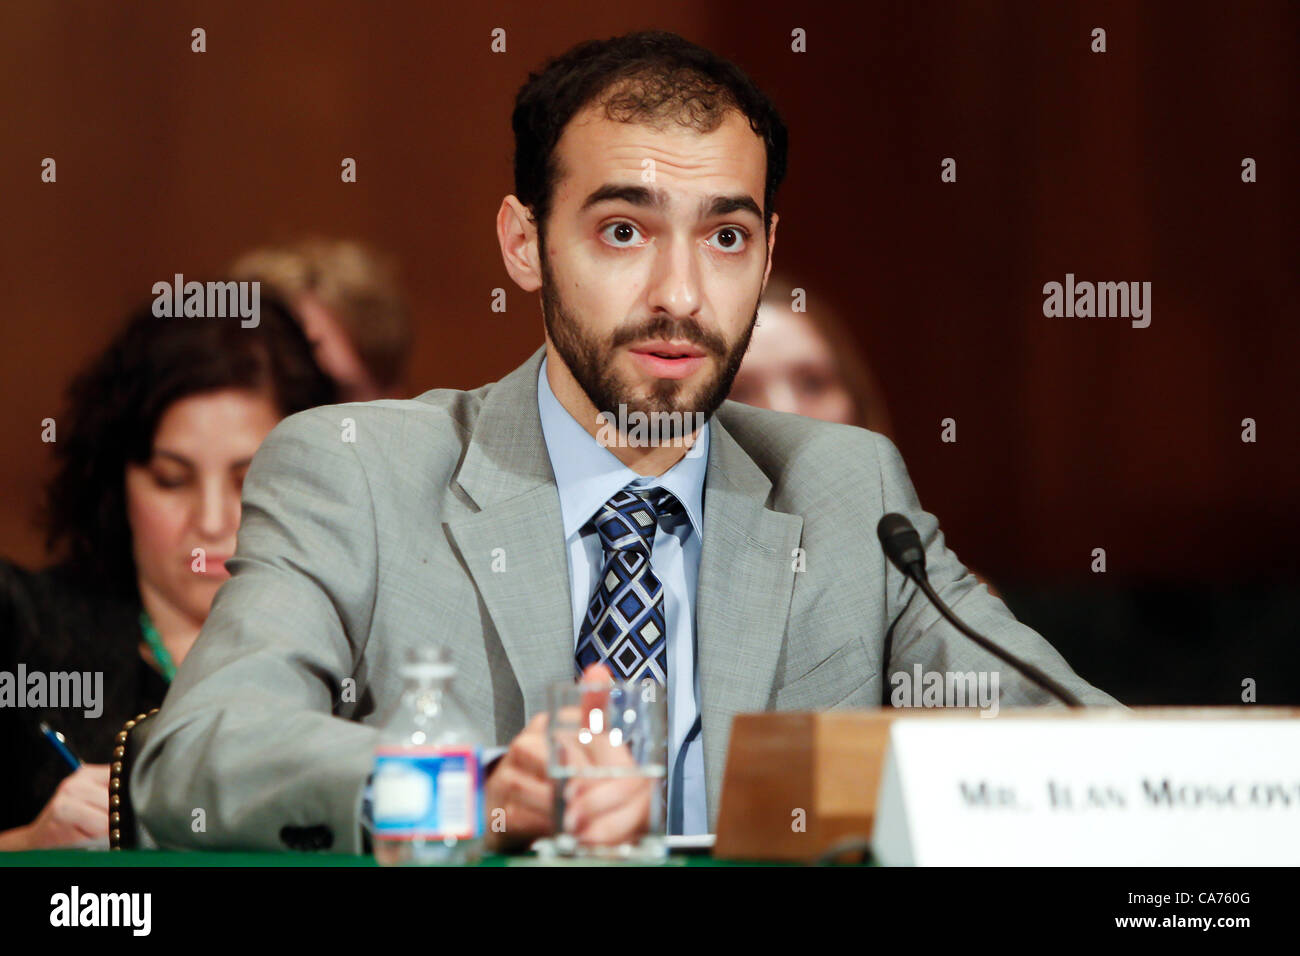 June 20, 2012 - Washington, DC, U.S. - ILAN MOSCOVITZ of The Motley Fool, testifies in front of the Senate Securities, Insurance and Investment Subcommittee hearing on ''Examining the IPO Process: Is It Working for Ordinary Investors? (Credit Image: © James Berglie/ZUMAPRESS.com) Stock Photo